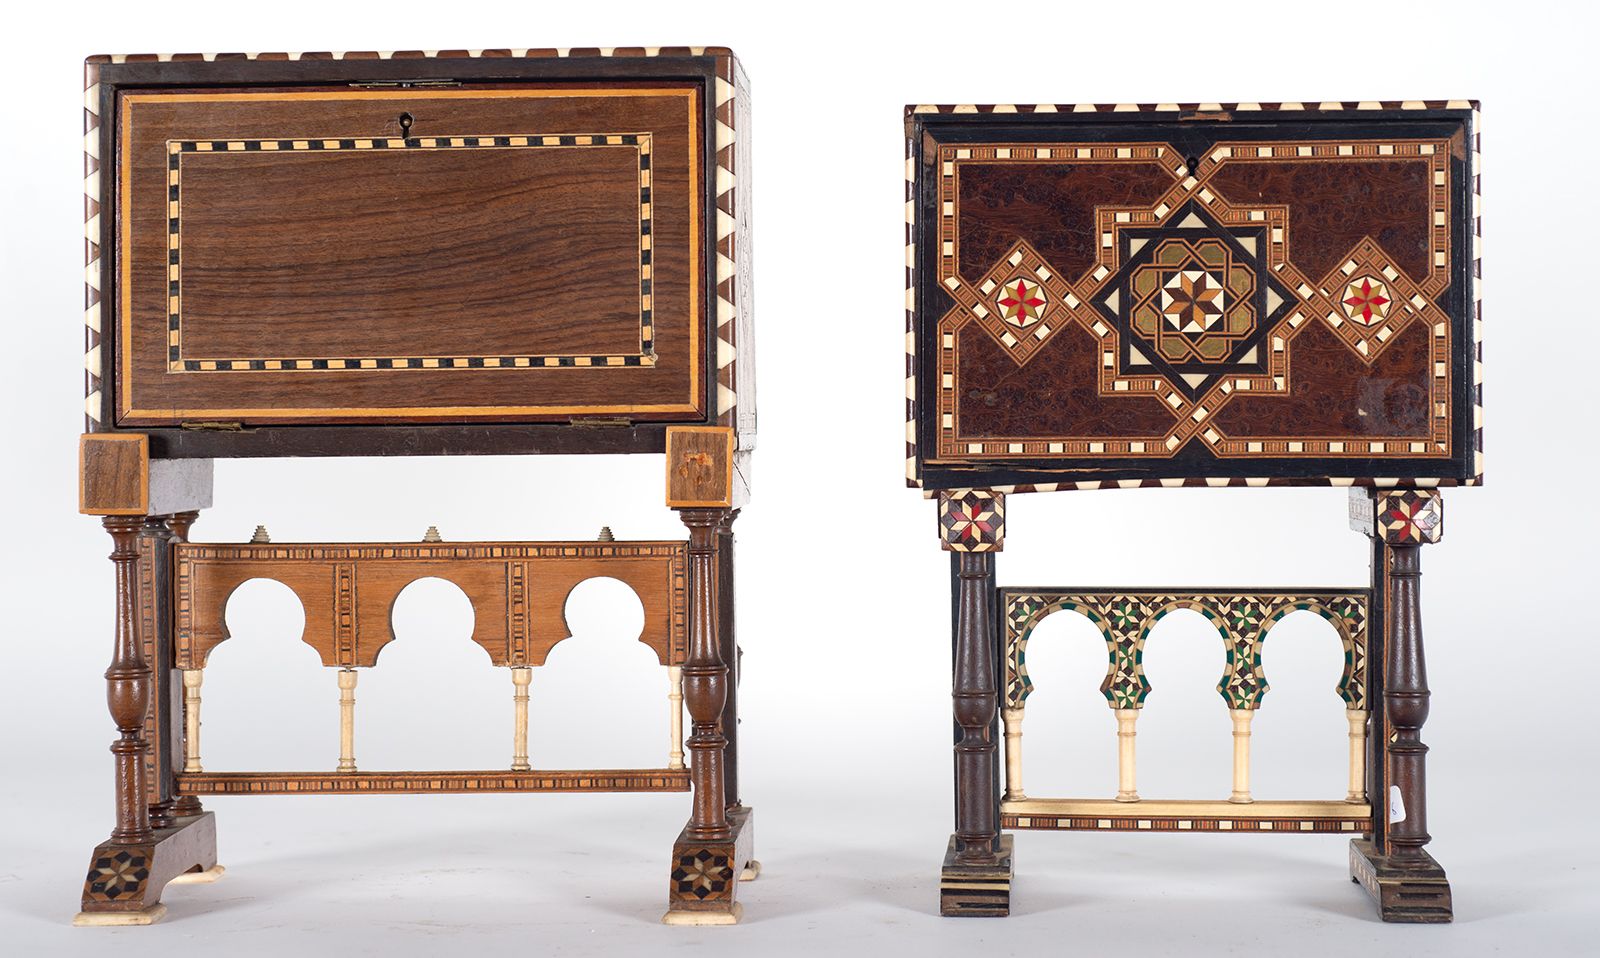 Pair of Nasrid cabinets, 19th - 20th century Measurements: 29 x 22 x 10 cm